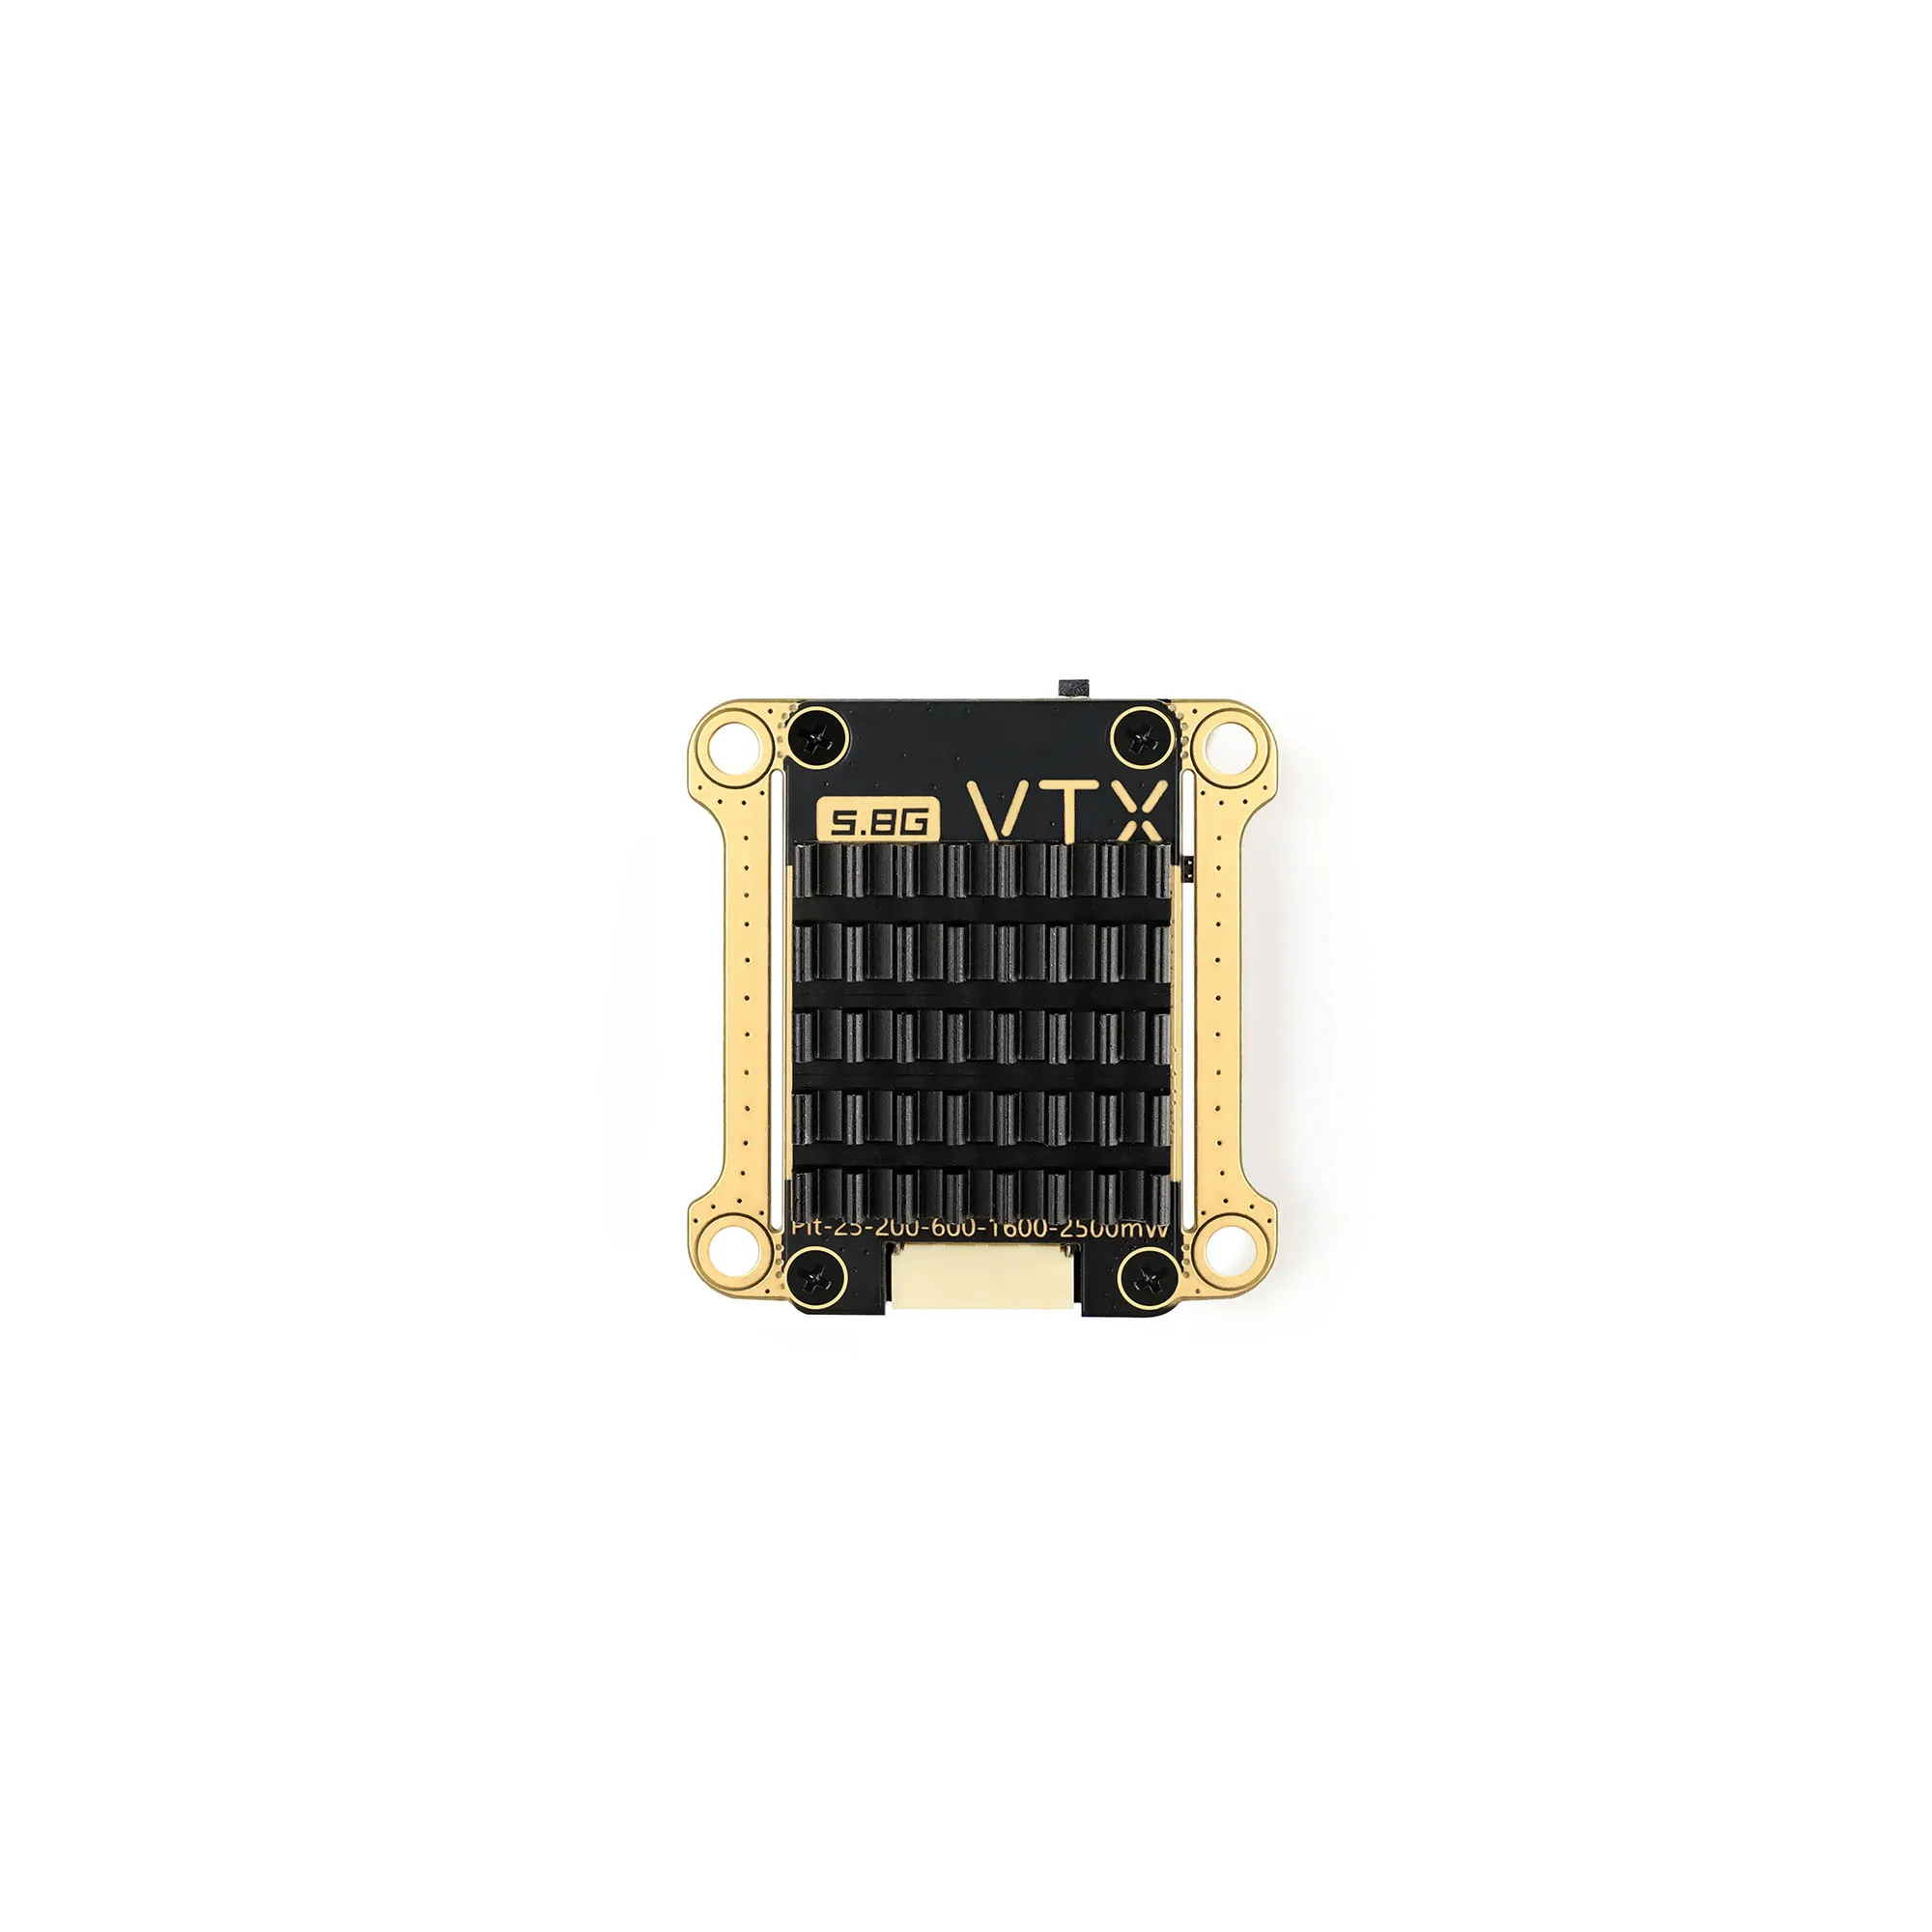 

GEPRC RAD VTX 5.8G 2.5W PitMode 2500mW Built-in Microphone 30.5X30.5mm 2-8S for RC Airplane FPV Long Range Drones DIY Parts